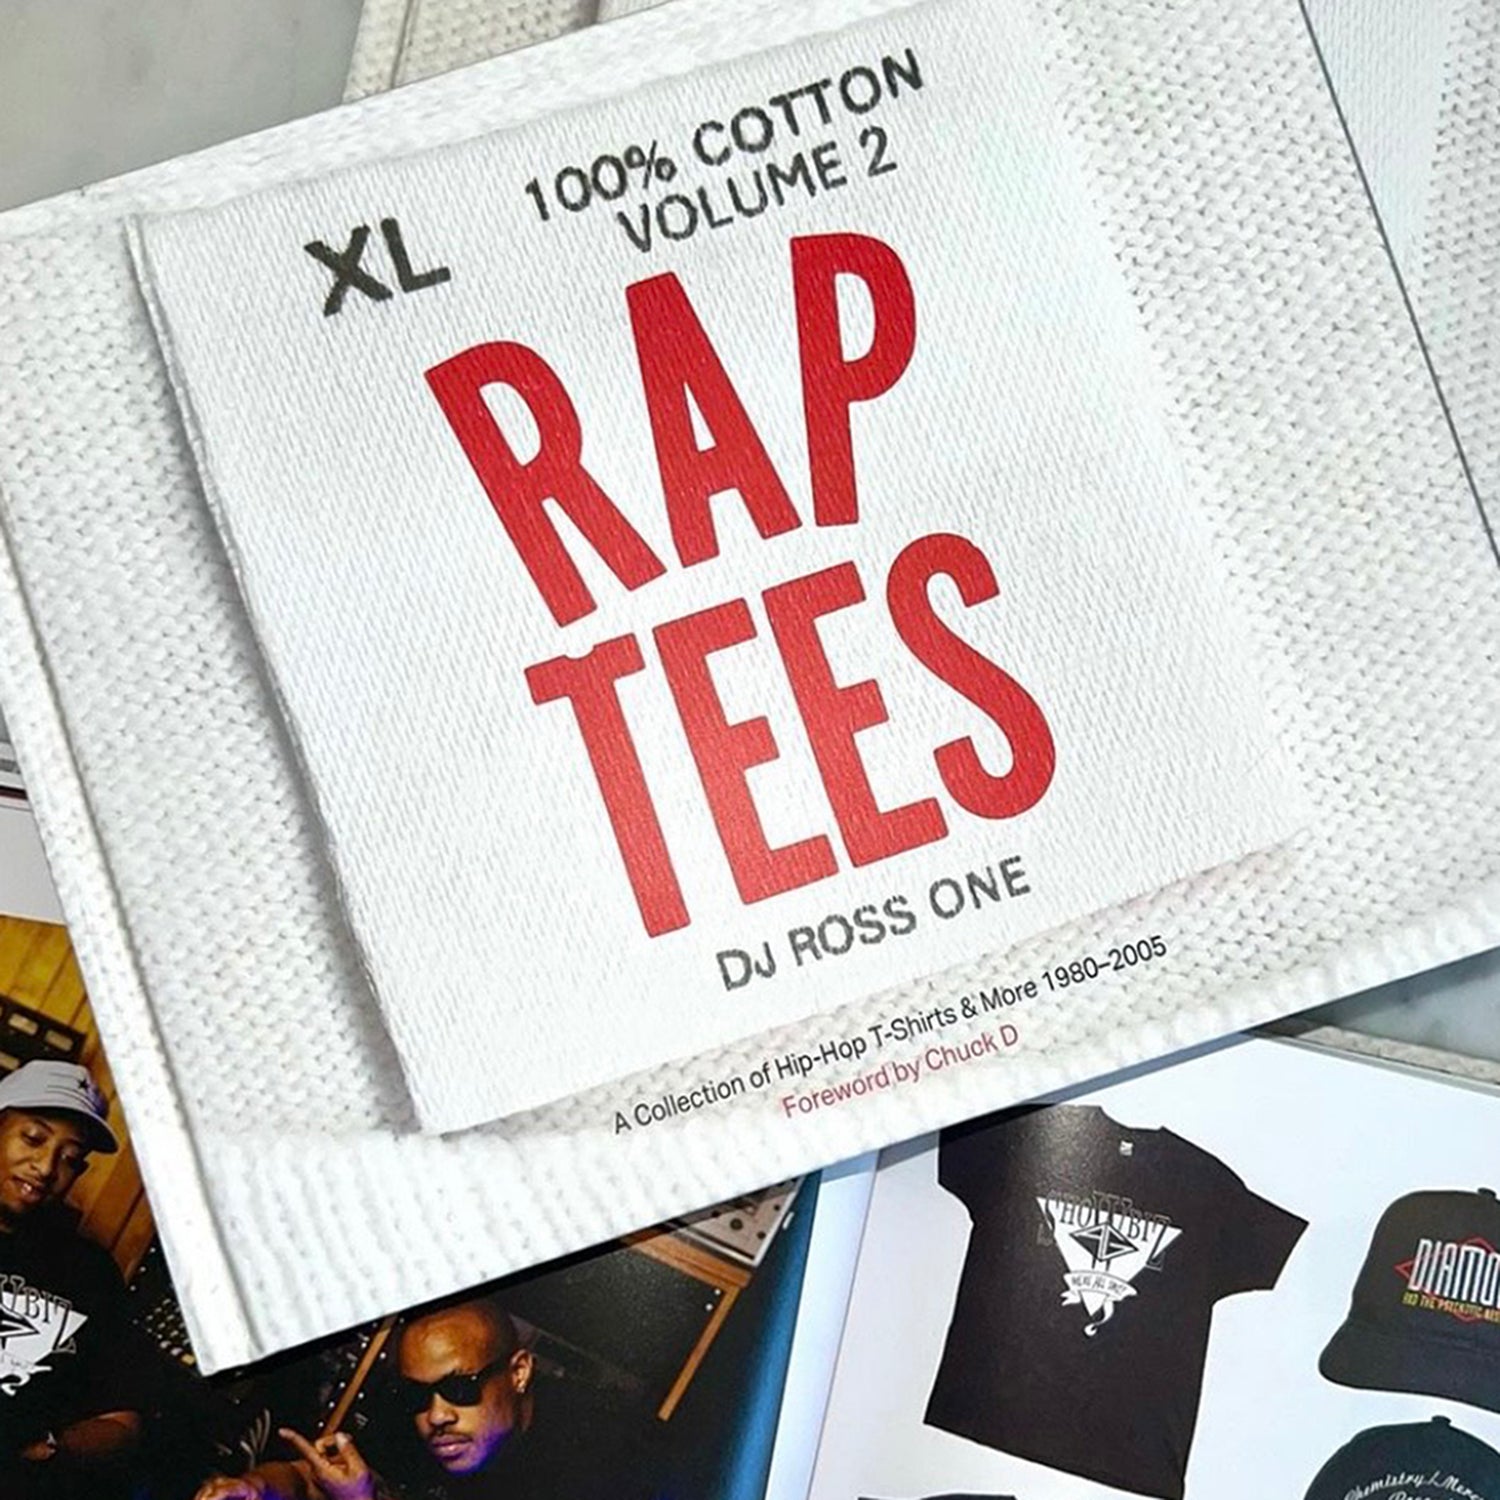 DJ ROSS ONE<br>    “ RAP TEES “ Volume 2 A Collection of Hip-Hop<br> T-Shirts & More 1980-2005